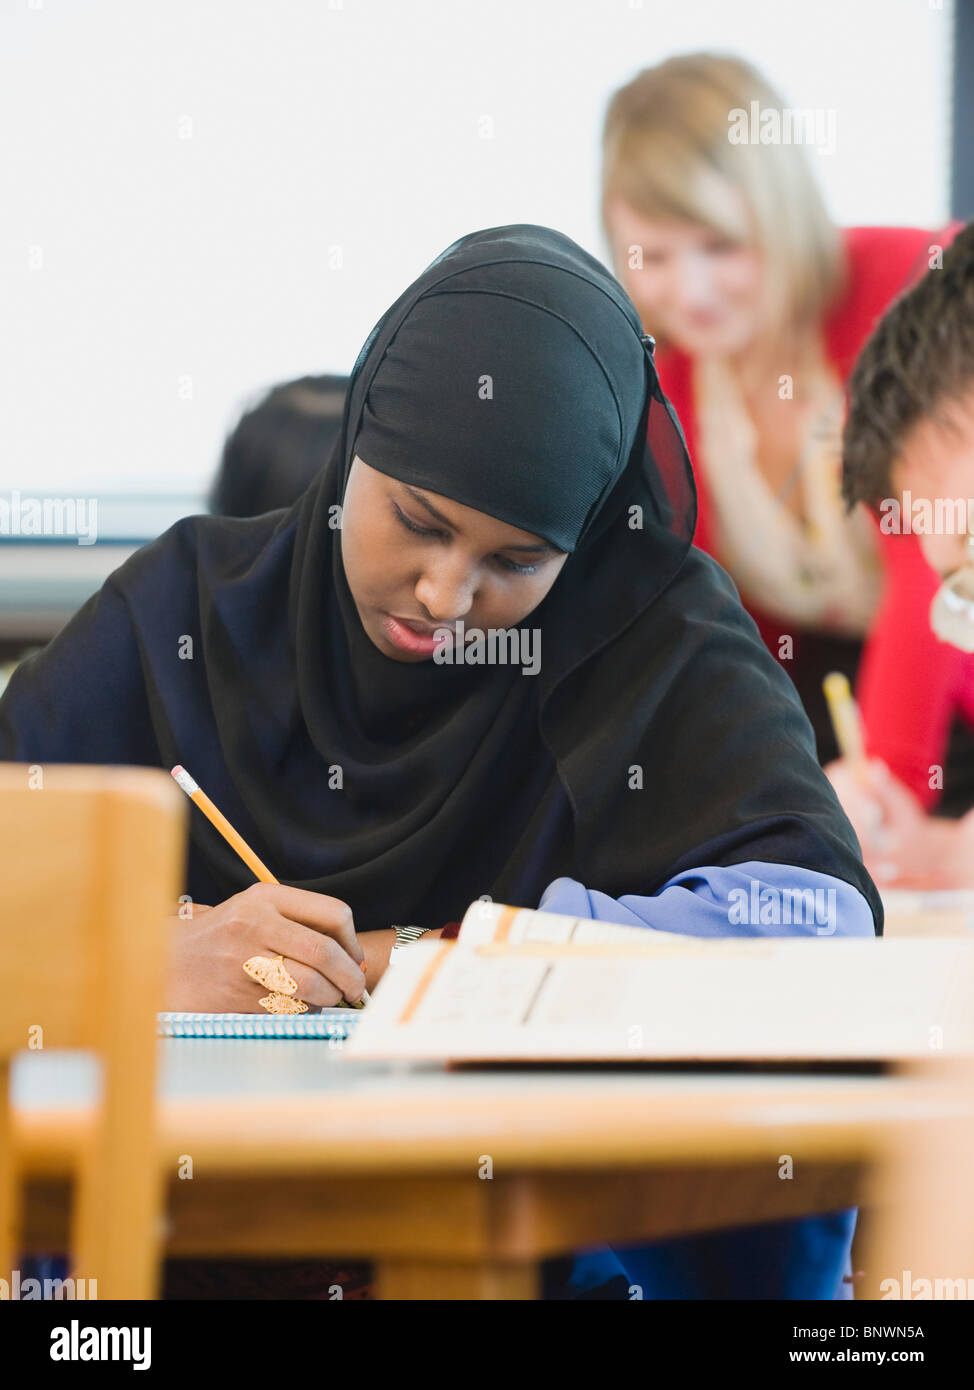 adults-students-learning-english-as-a-second-language-stock-photo-alamy